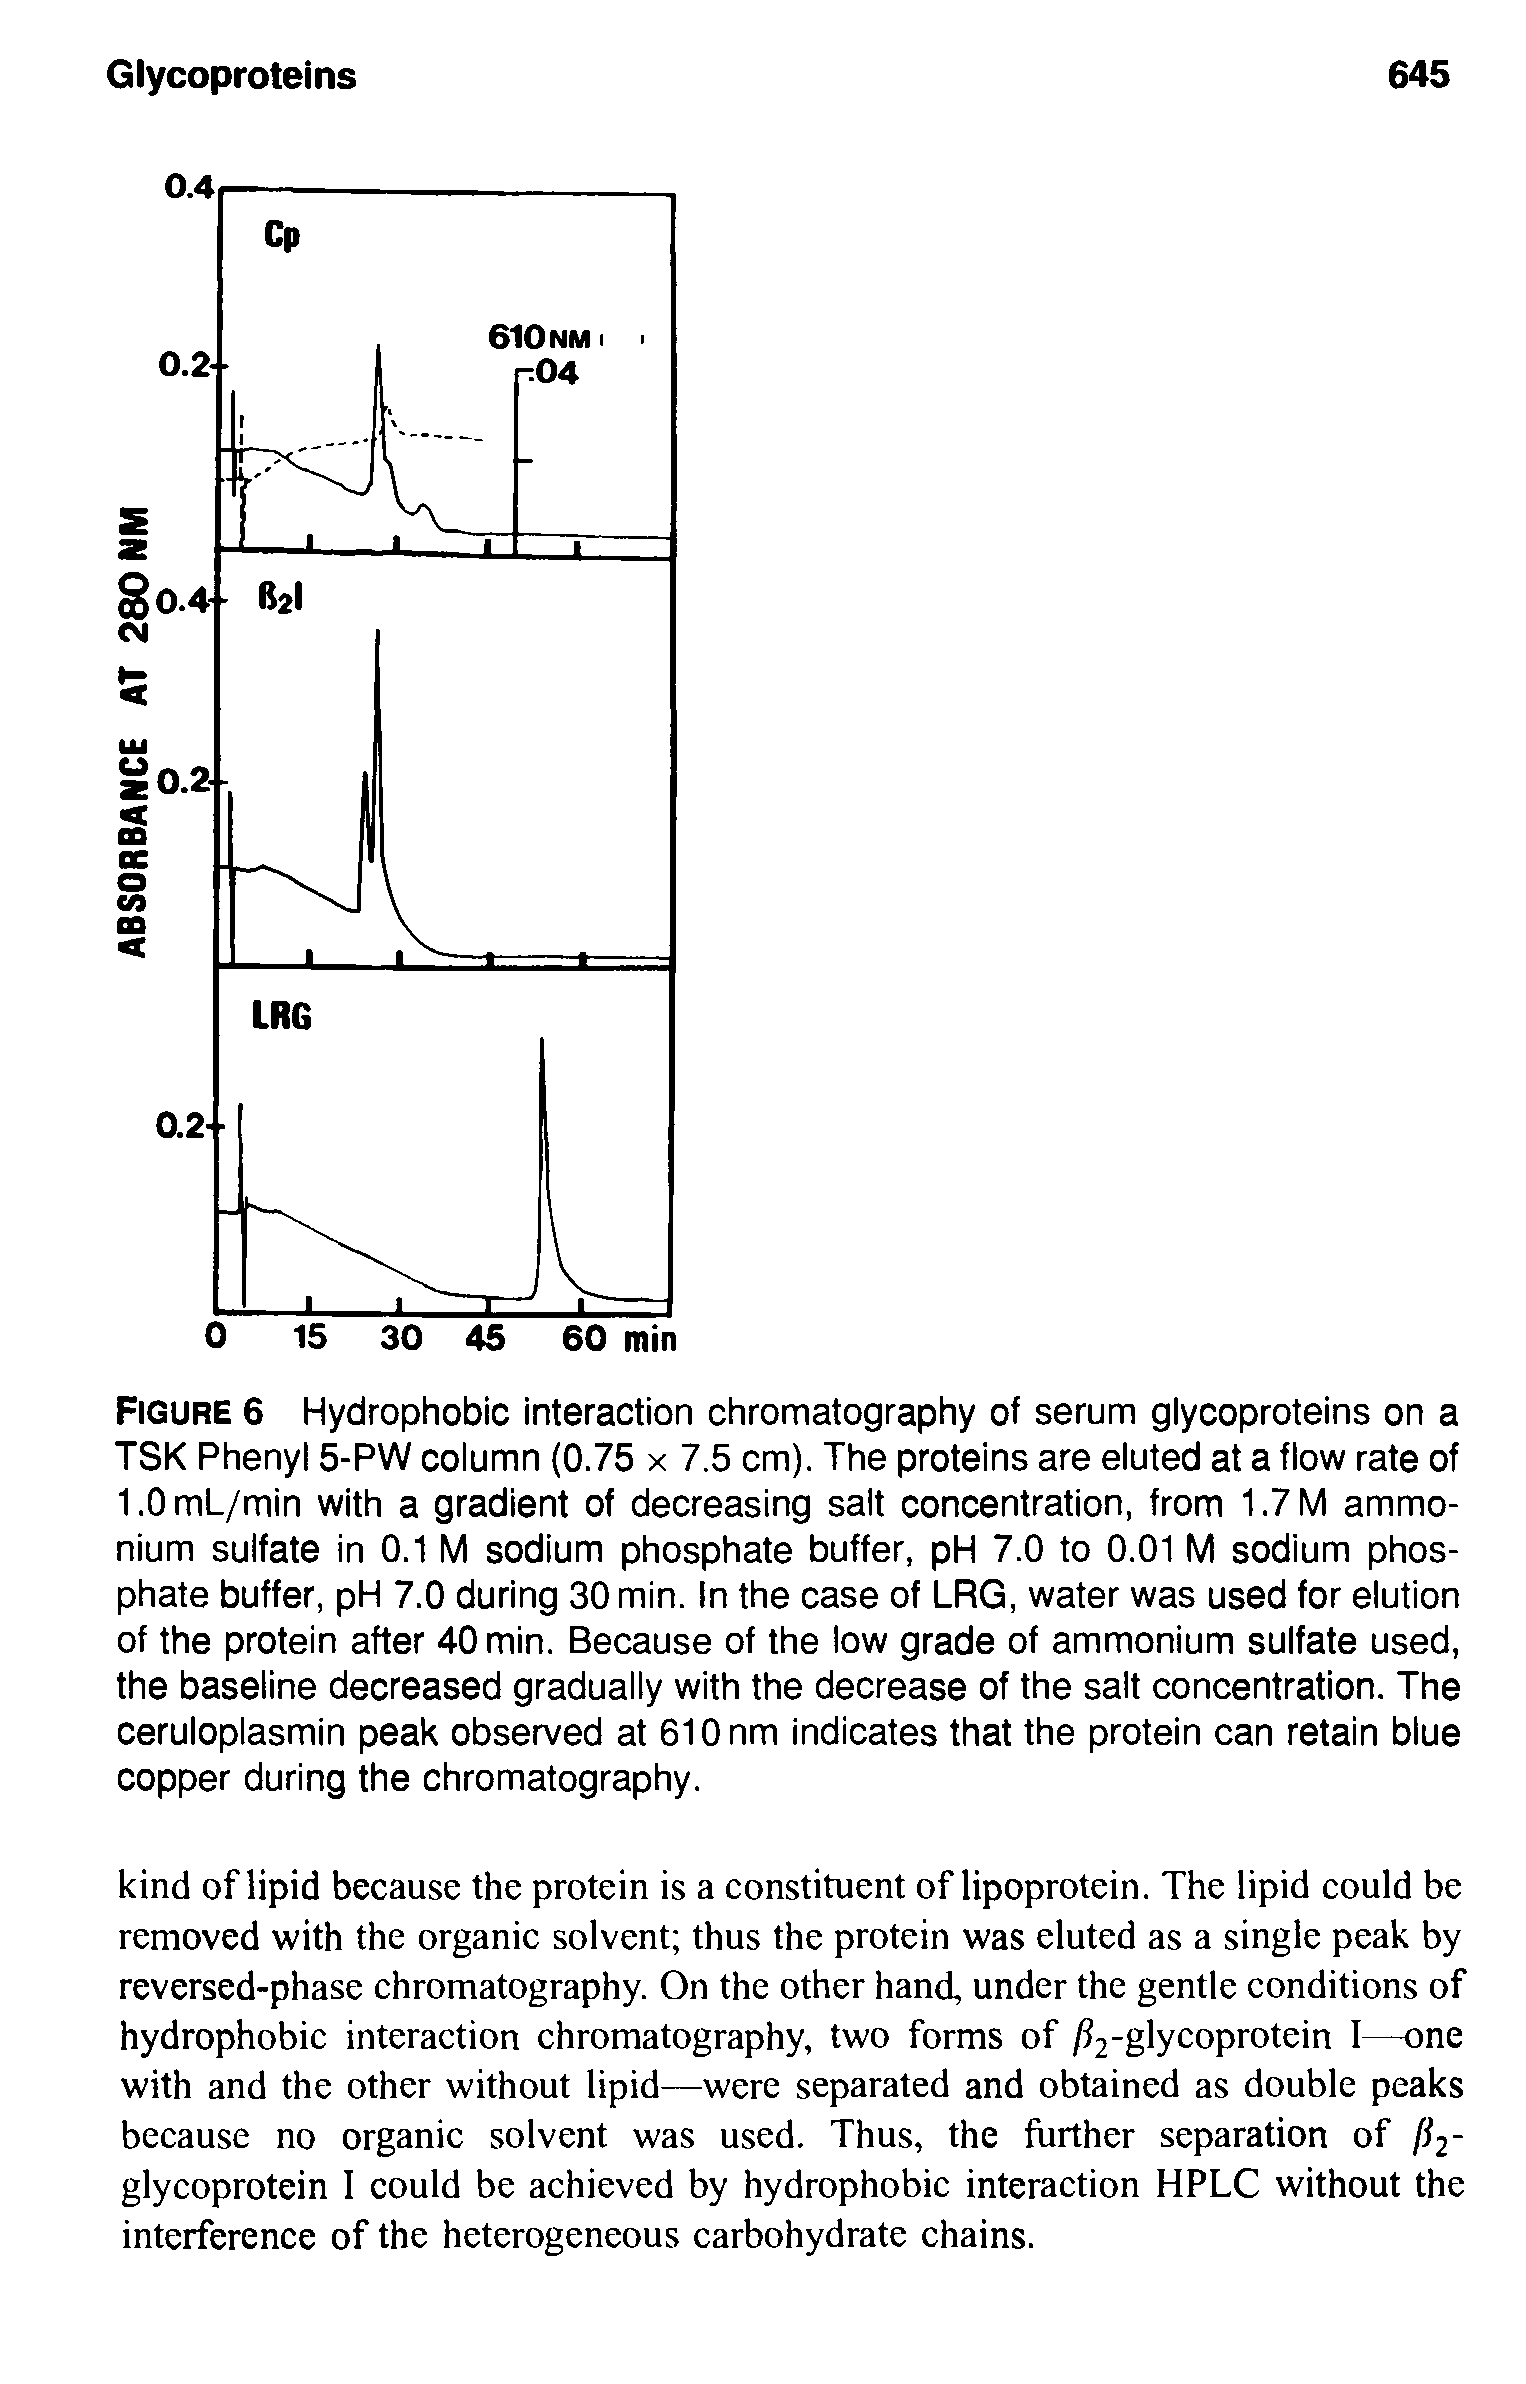 Figure 6 Hydrophobic interaction chromatography of serum glycoproteins on a TSK Phenyl 5-PW column (0.75 x 7.5 cm). The proteins are eluted at a flow rate of 1.0 mL/min with a gradient of decreasing salt concentration, from 1.7 M ammonium sulfate in 0.1 M sodium phosphate buffer, pH 7.0 to 0.01 M sodium phosphate buffer, pH 7.0 during 30 min. In the case of LRG, water was used for elution of the protein after 40 min. Because of the low grade of ammonium sulfate used, the baseline decreased gradually with the decrease of the salt concentration. The ceruloplasmin peak observed at 610nm indicates that the protein can retain blue copper during the chromatography.